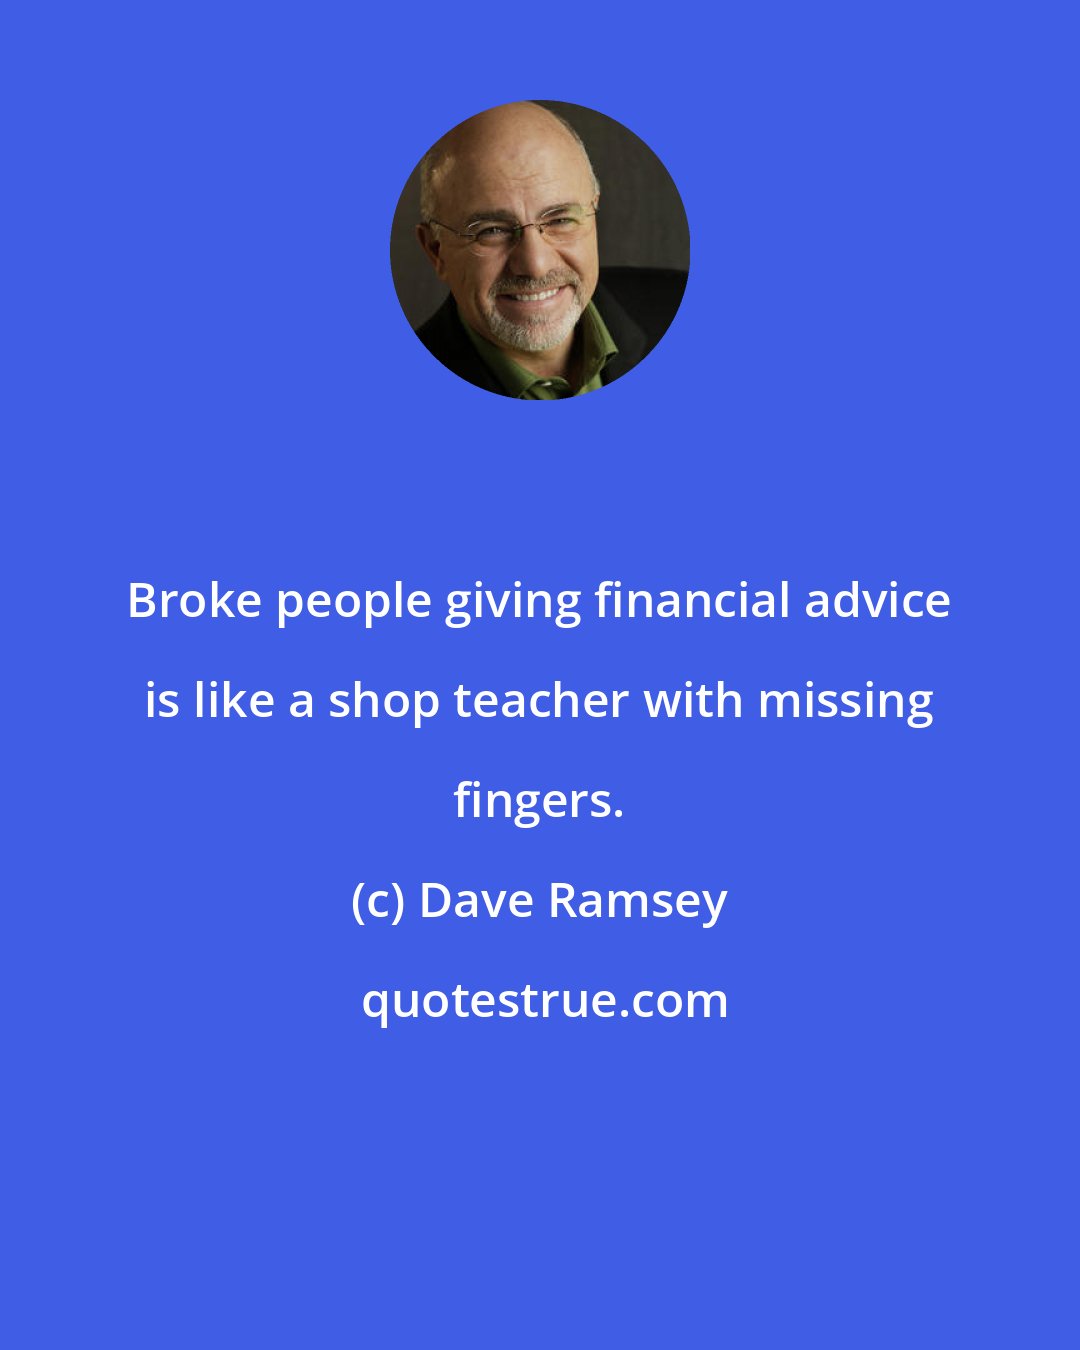 Dave Ramsey: Broke people giving financial advice is like a shop teacher with missing fingers.